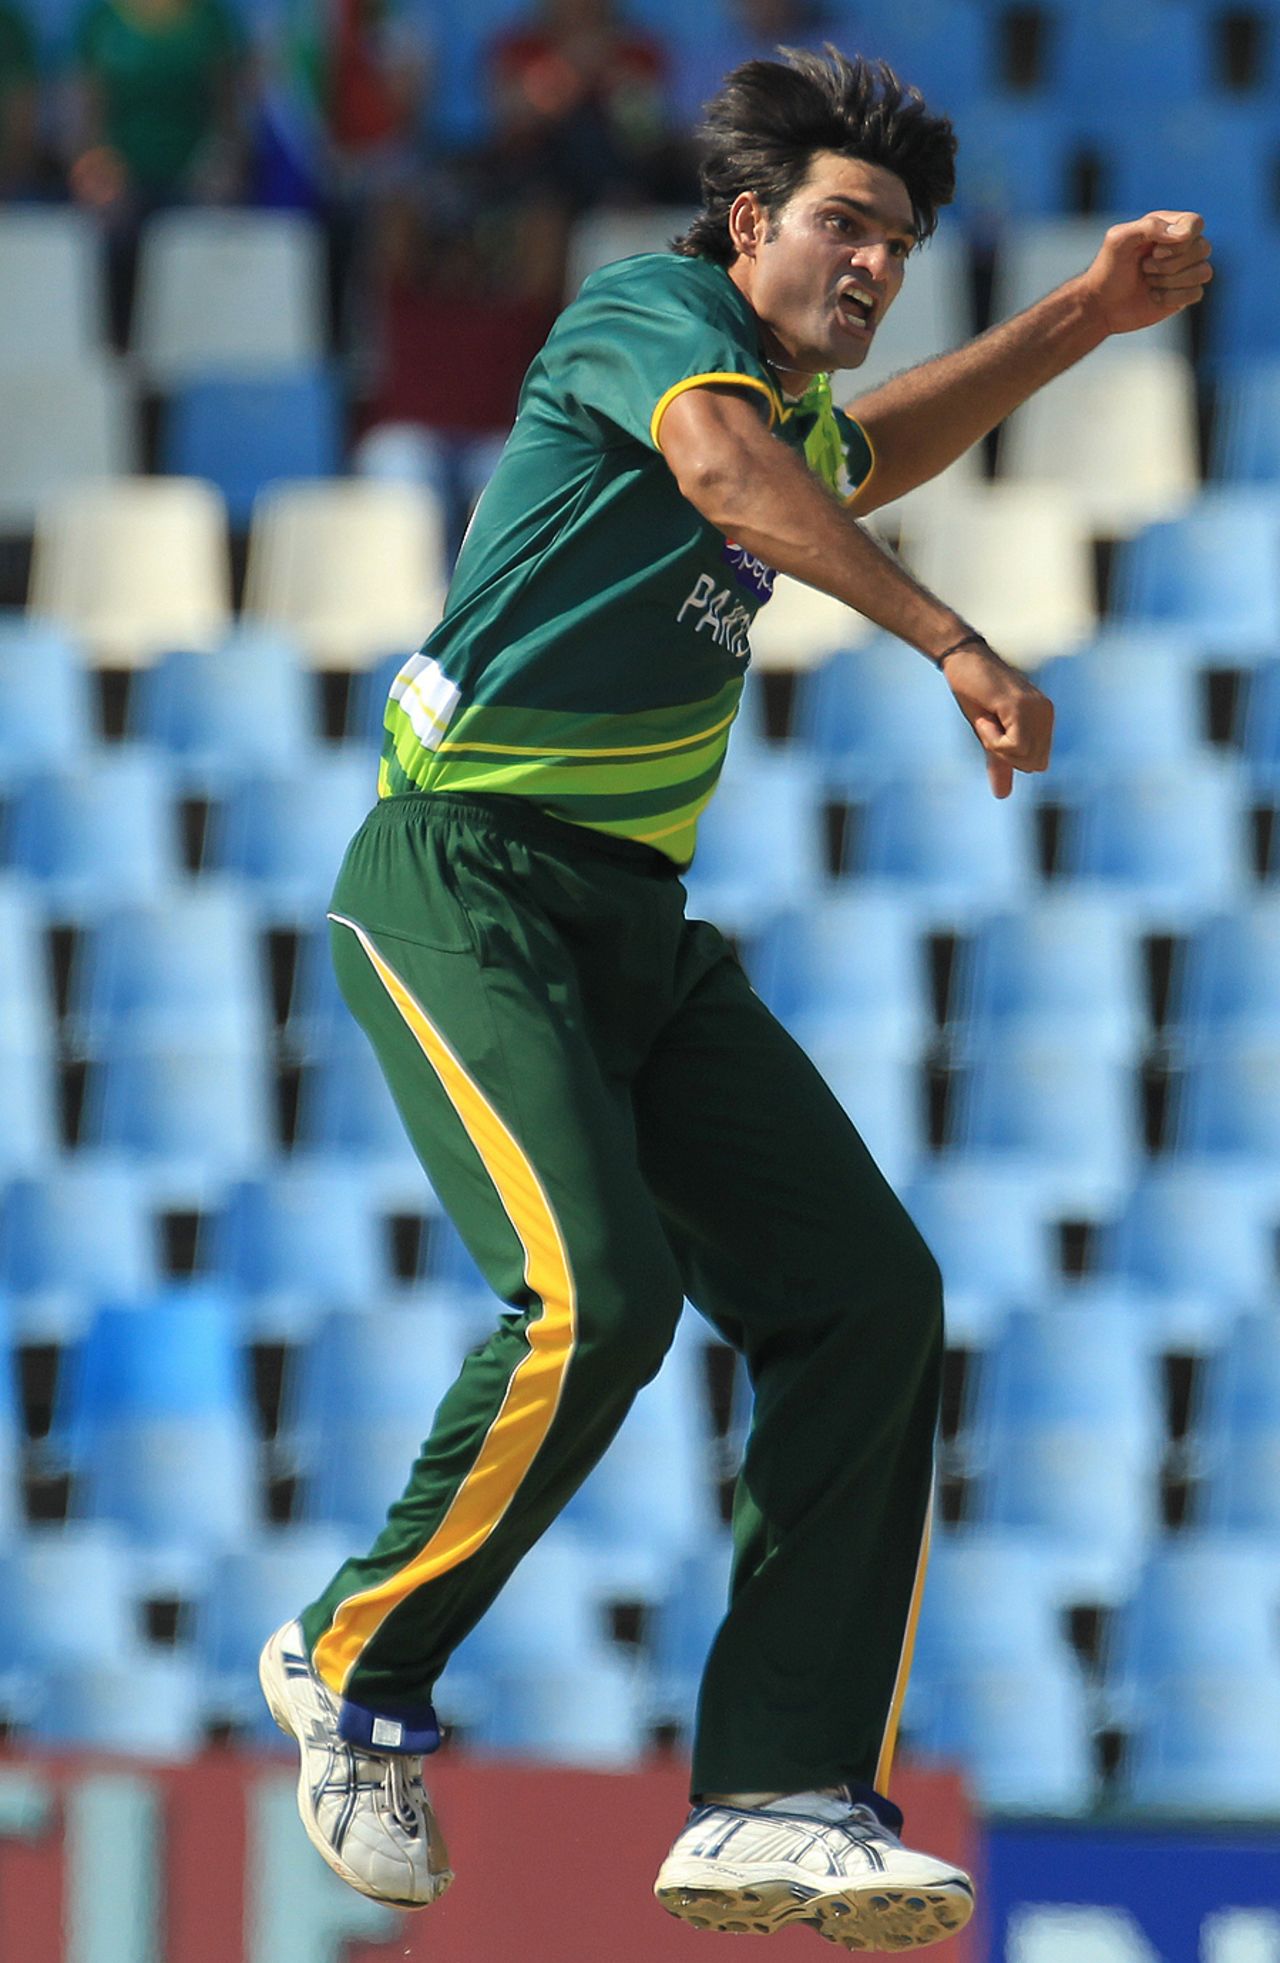 Mohammad Irfan reacts after taking a wicket, South Africa v Pakistan, 2nd ODI, Centurion, March 15, 2013